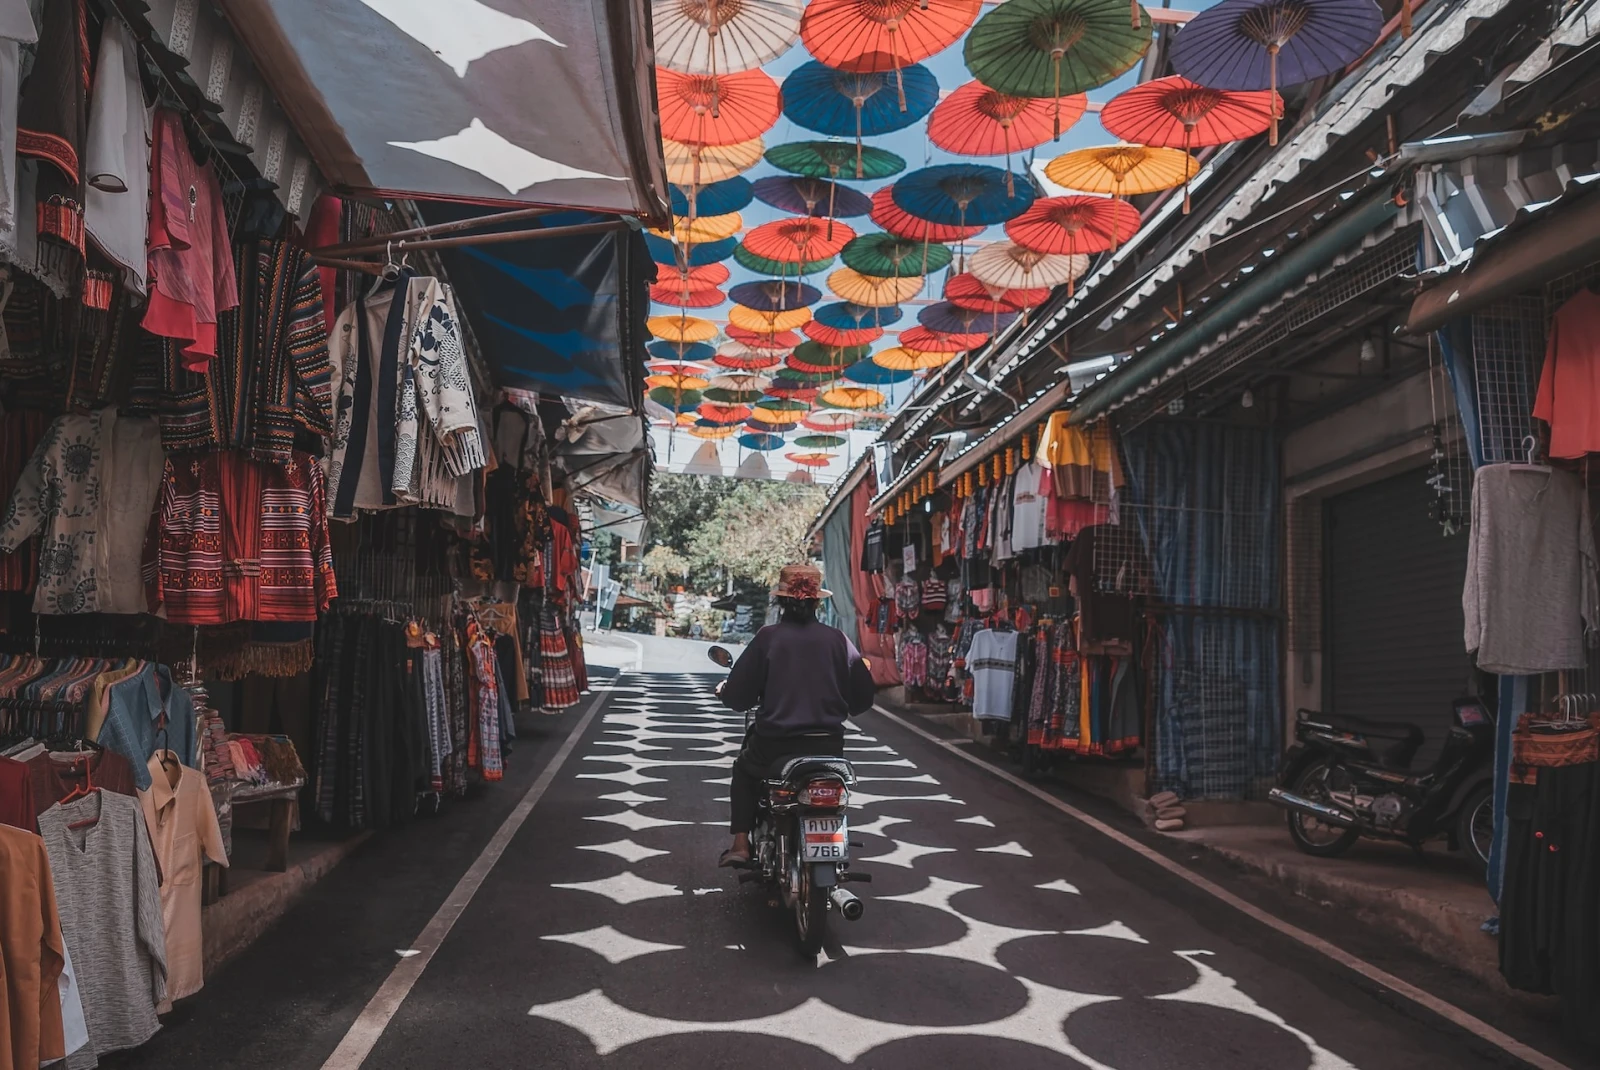 A covered market with colorful stalls in Thailand.